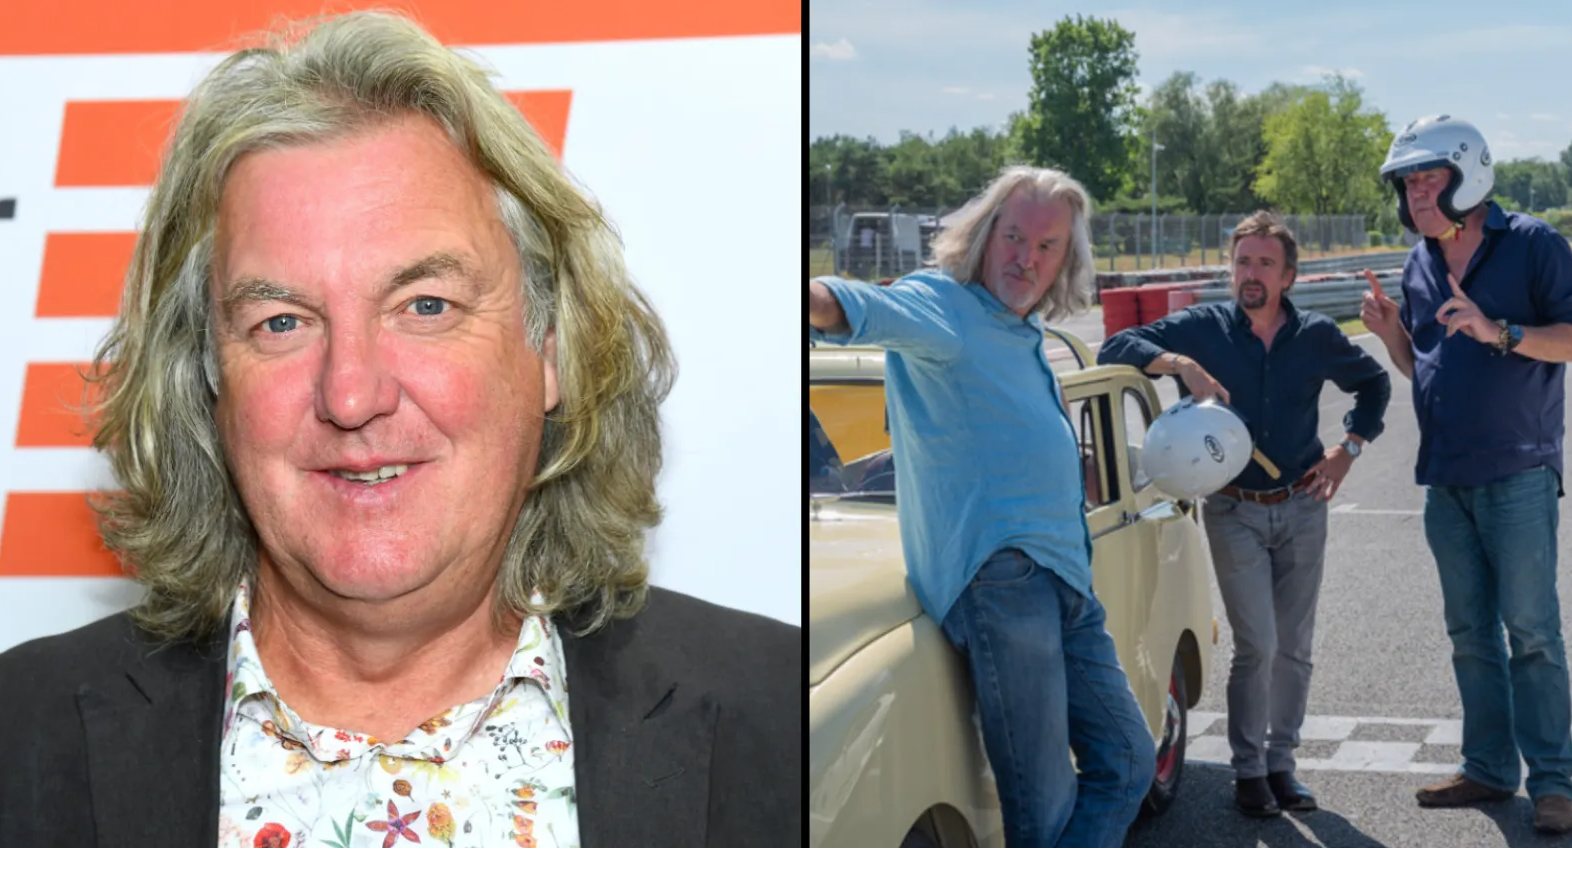 James May had a terrible time filming The Grand Tour: Eurocrash